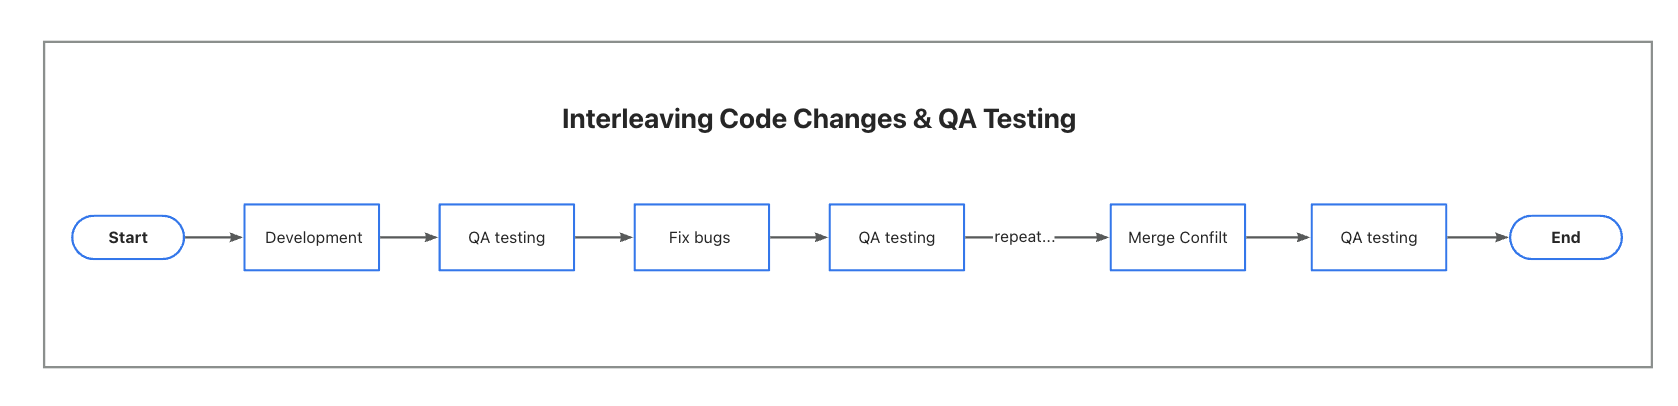 Code Changes and QA Testing Overlap